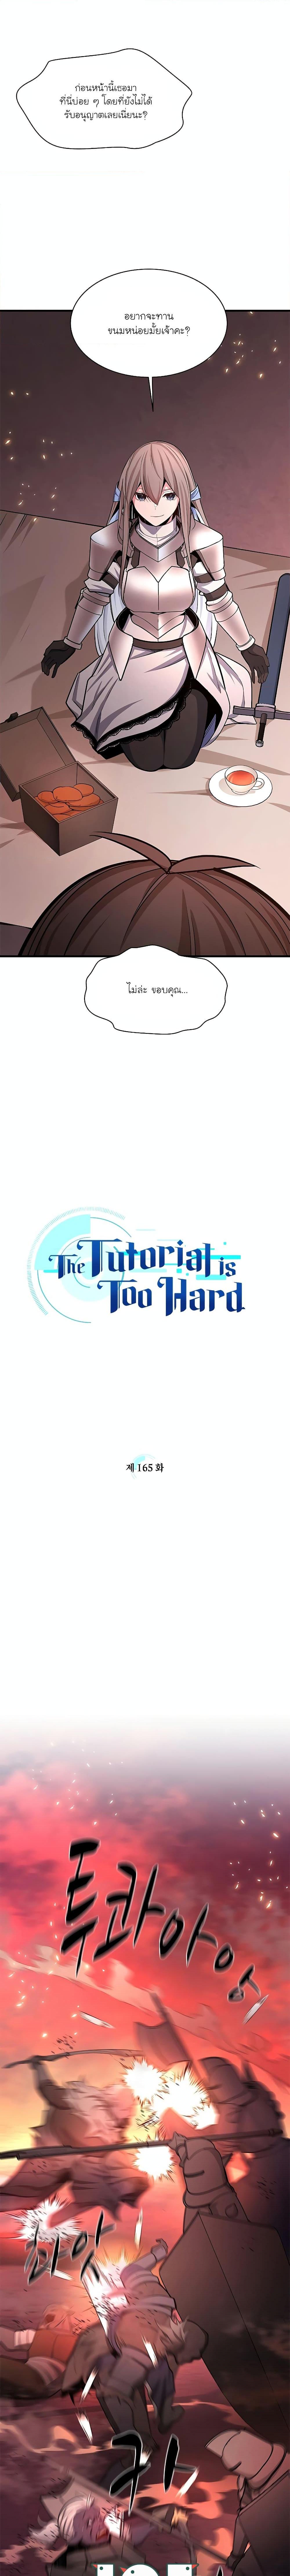 The Tutorial is Too Hard 165 05